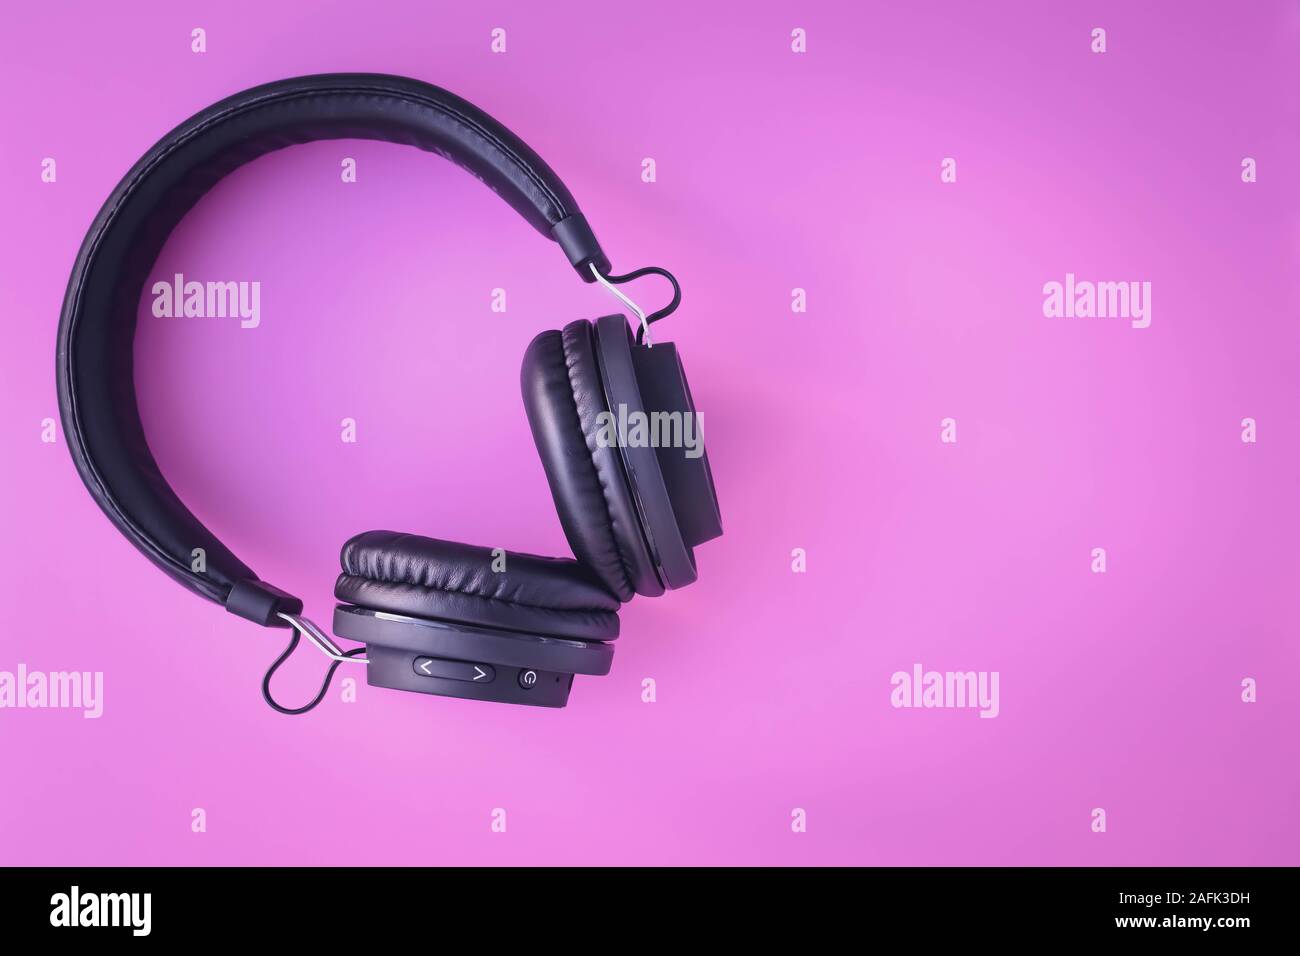 Portable black headphones on pink background. Mock-up with text space. Layout, creative design, bright frame. Music lifestyle. Youth earphones. Stock Photo